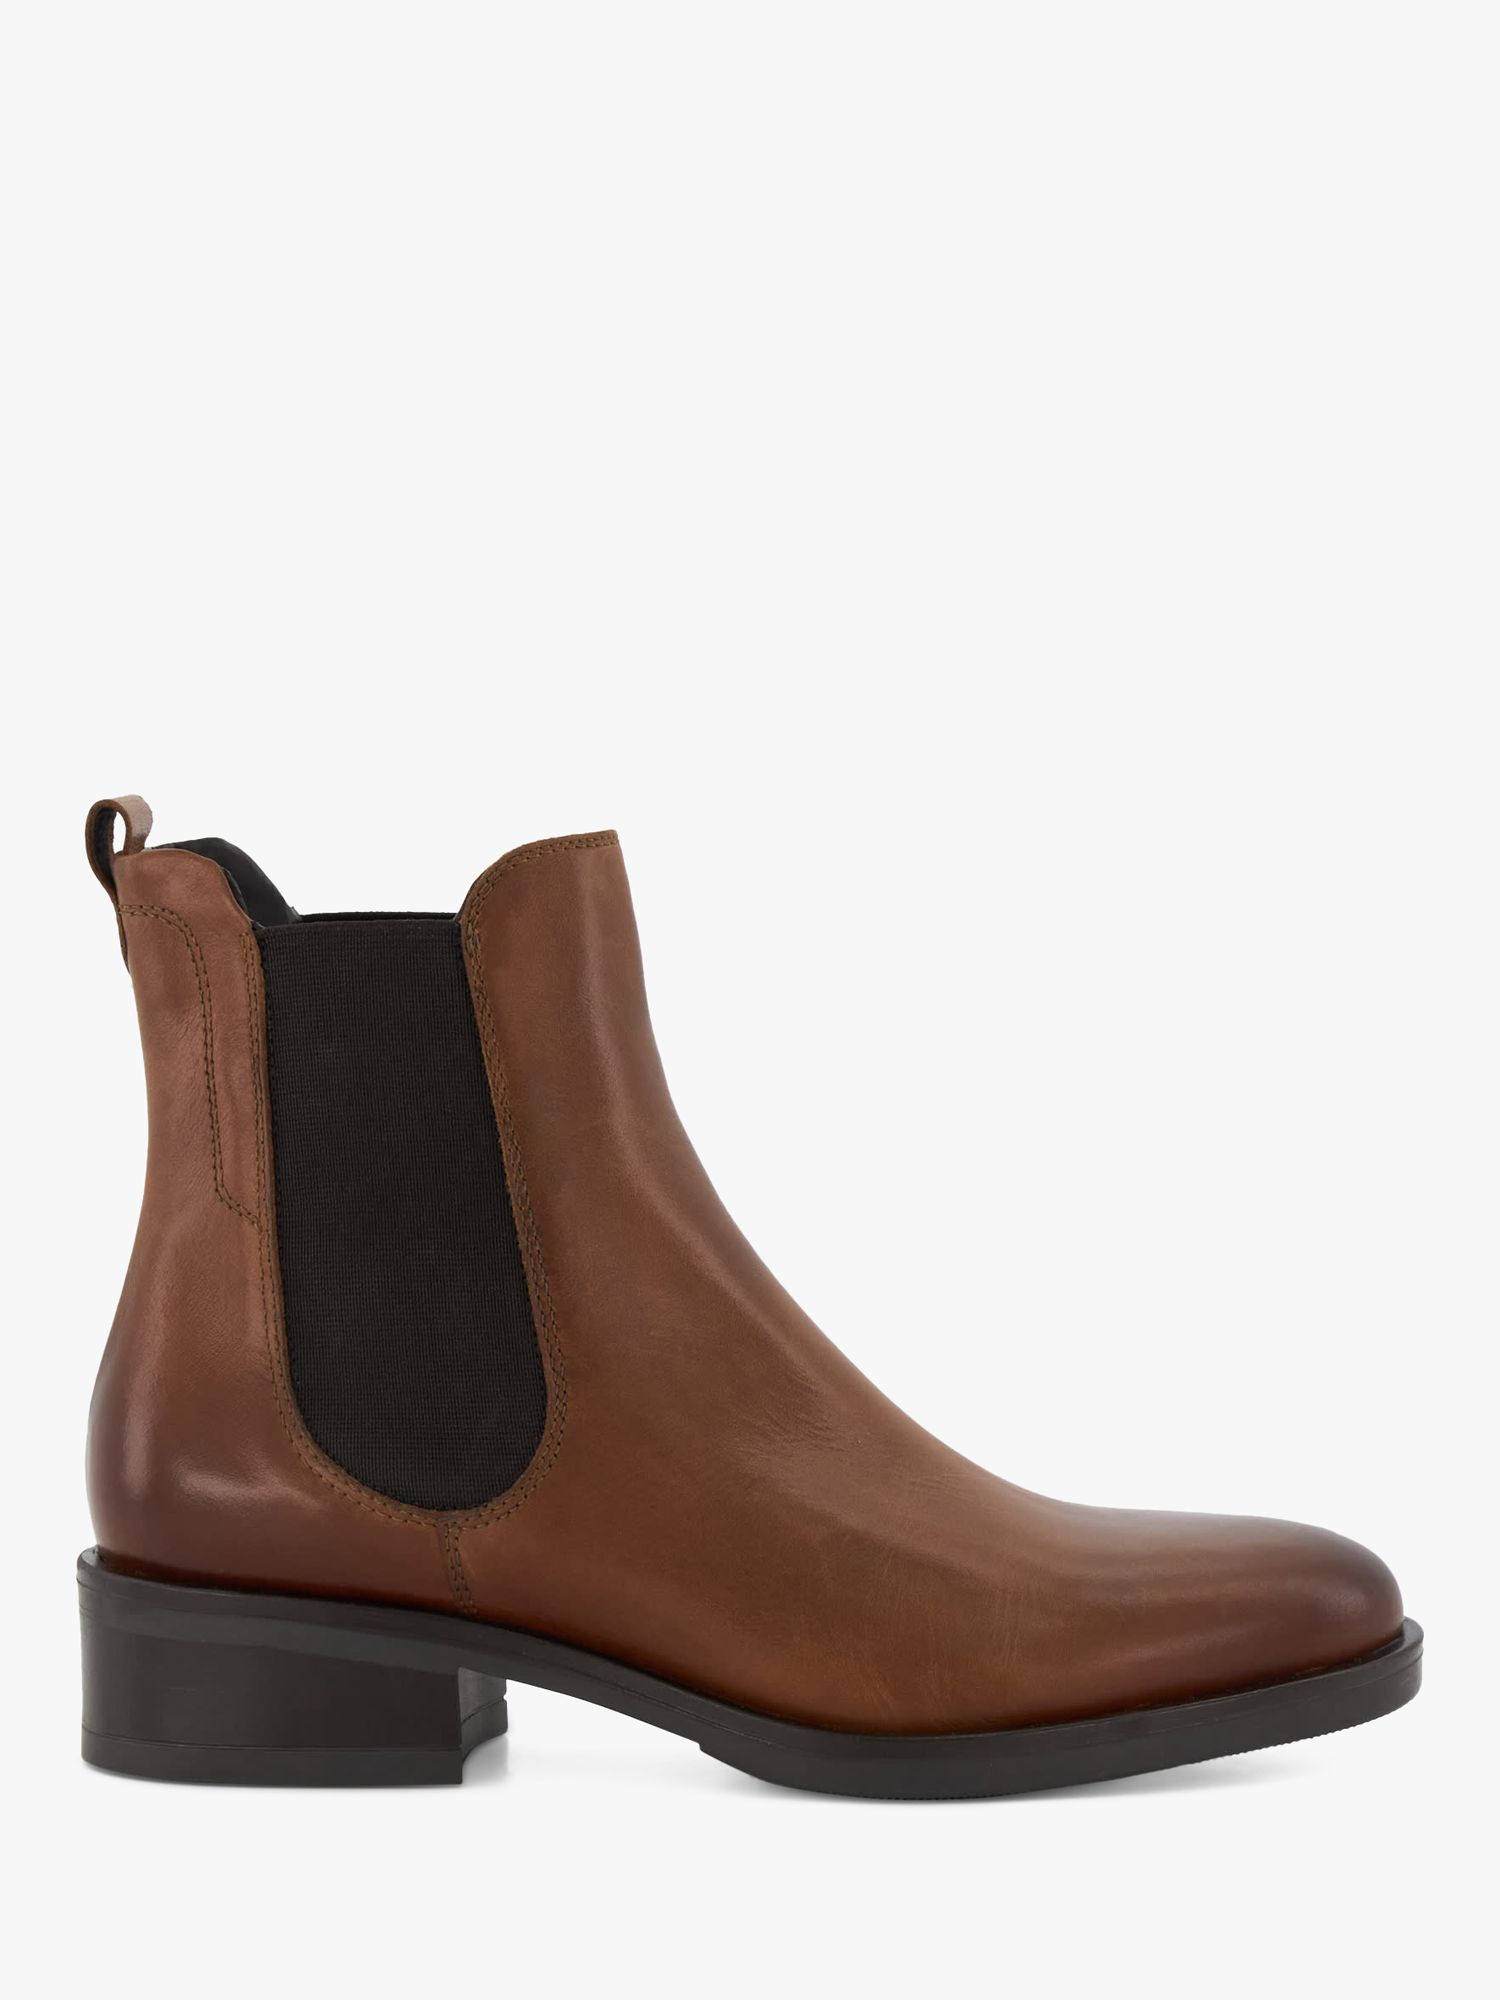 Dune Panoramic Leather Chelsea Boots, Tan at John Lewis & Partners